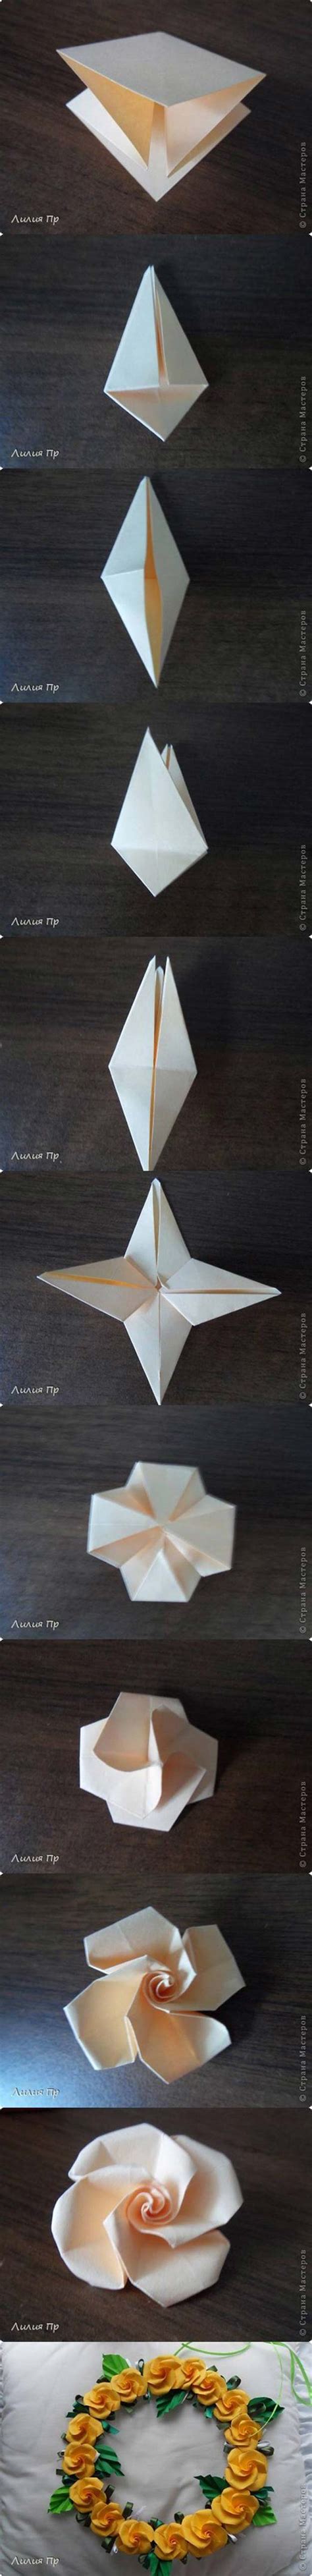 40 Best Diy Origami Projects To Keep Your Entertained Today